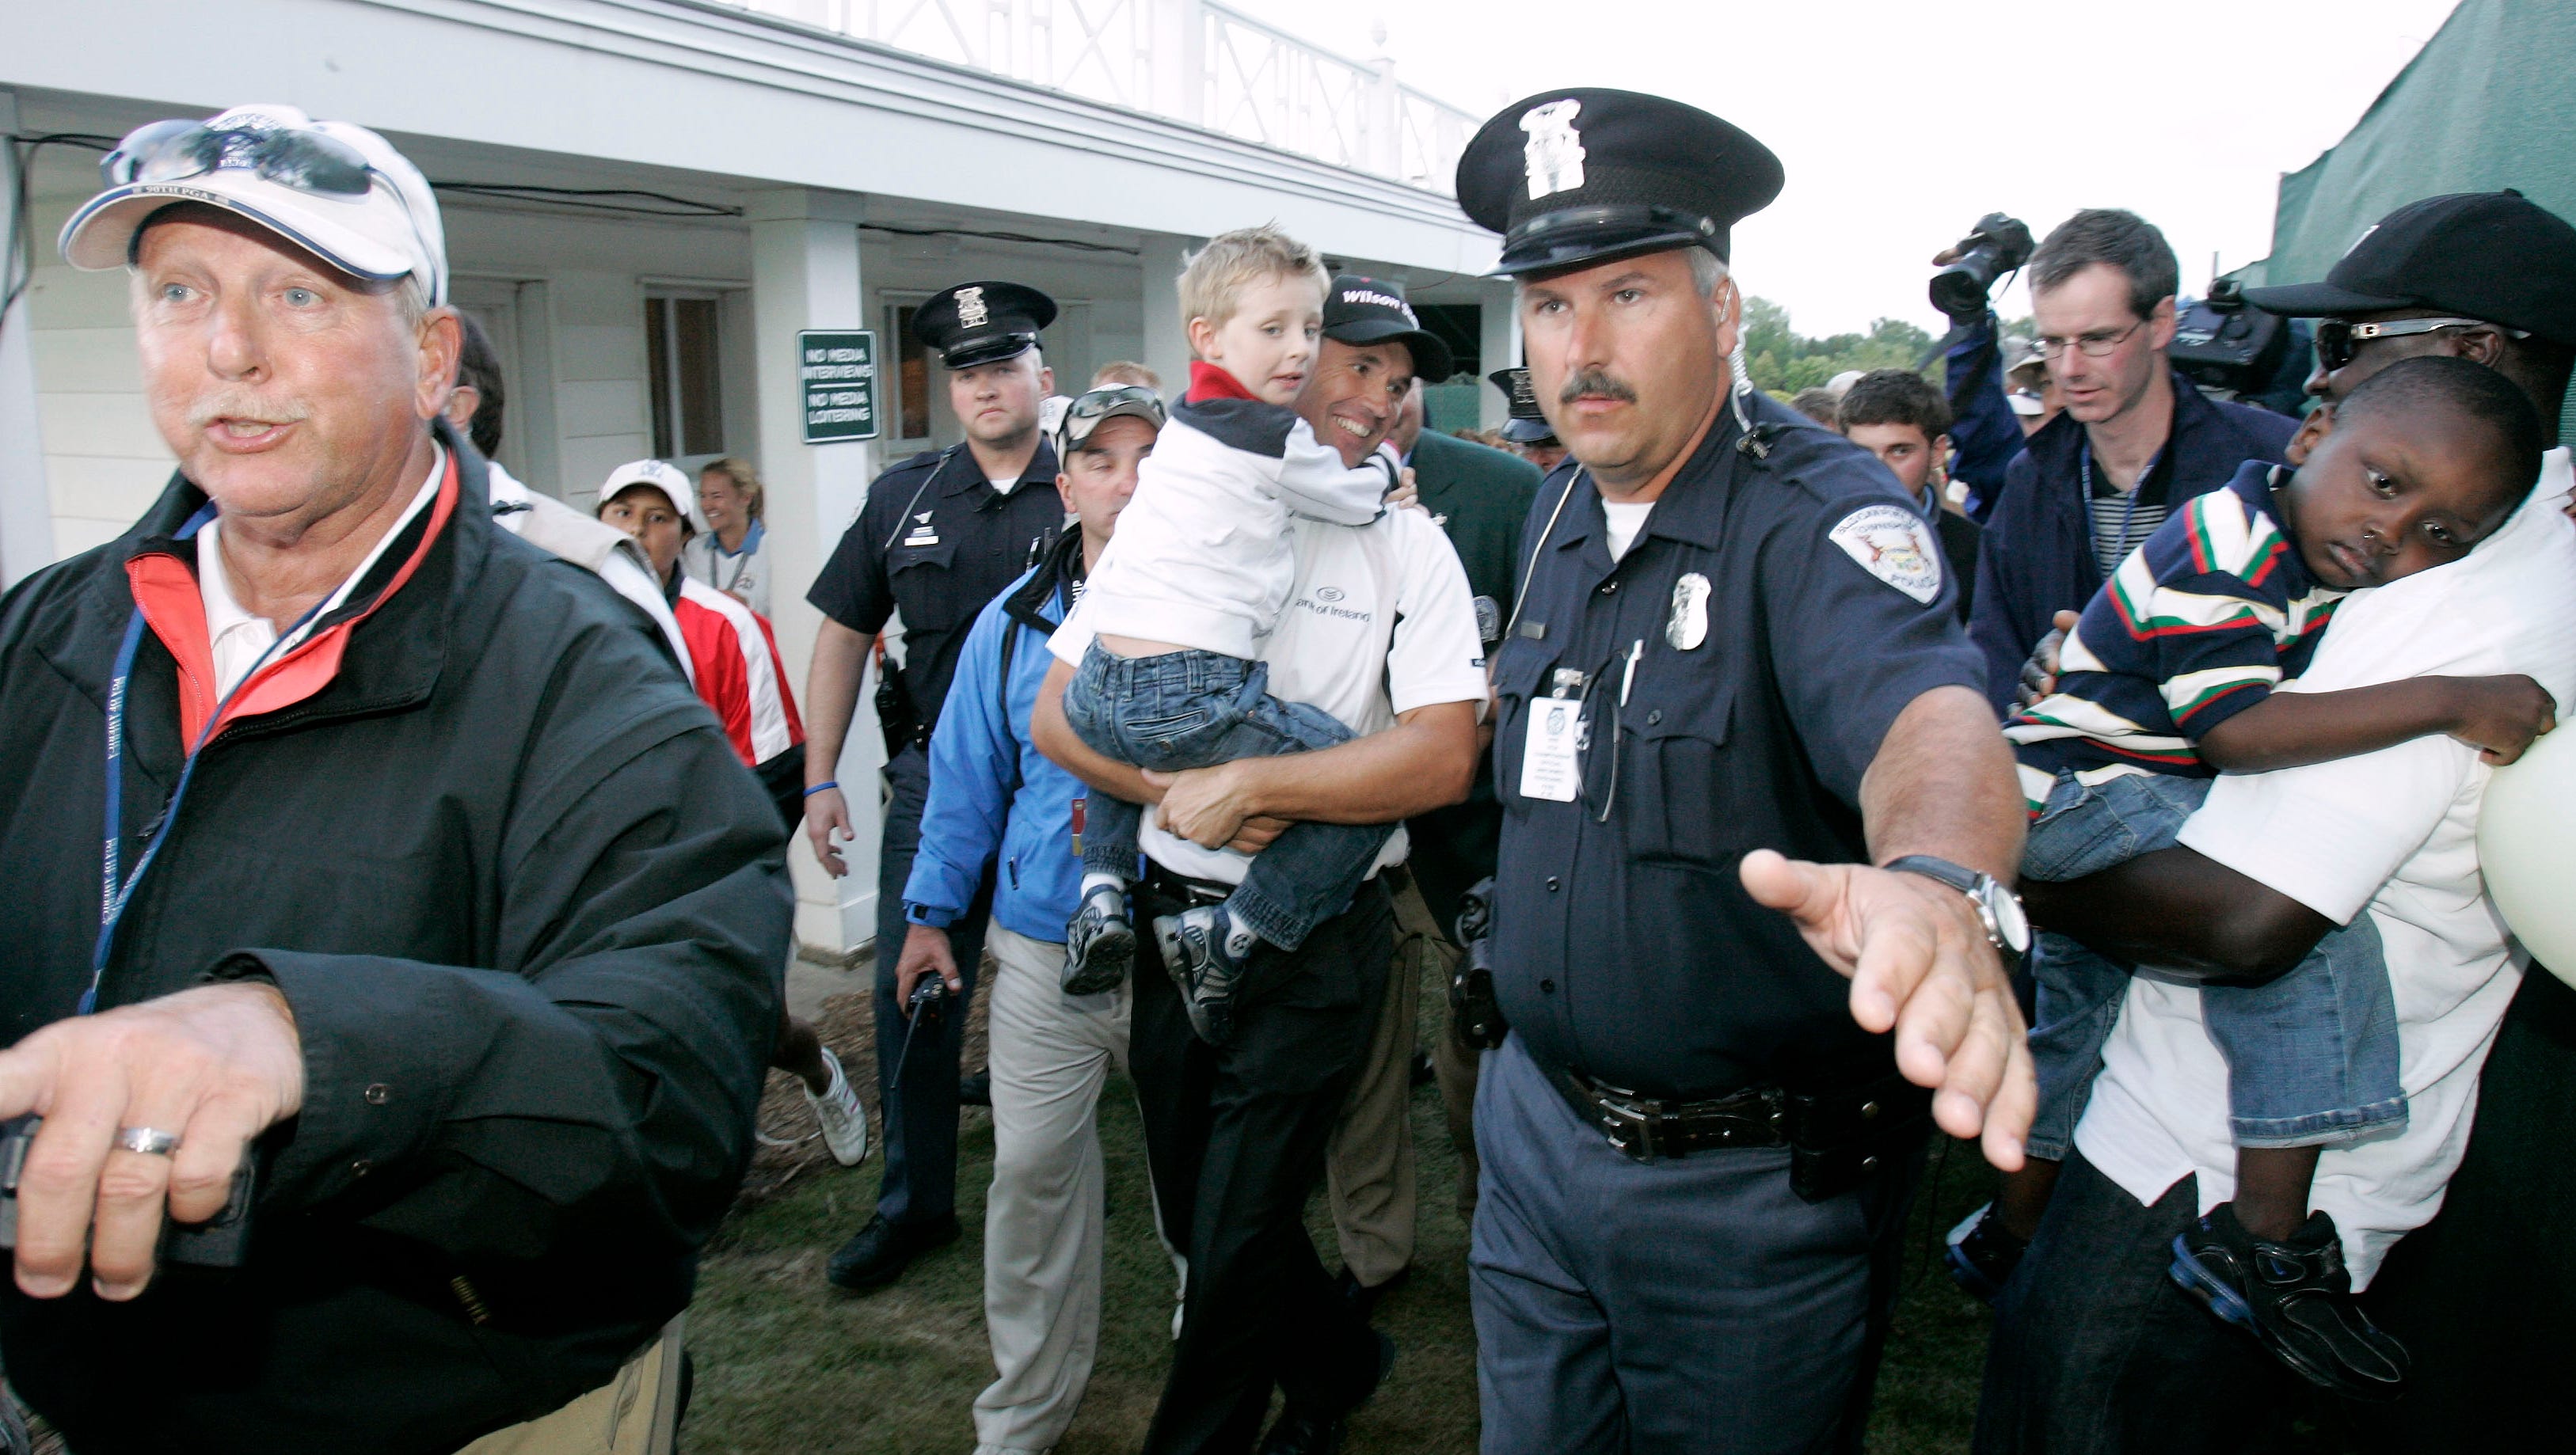 Padraig Harrington gets a police escort to make his way through the crowds after winning the 2008 PGA Championship.